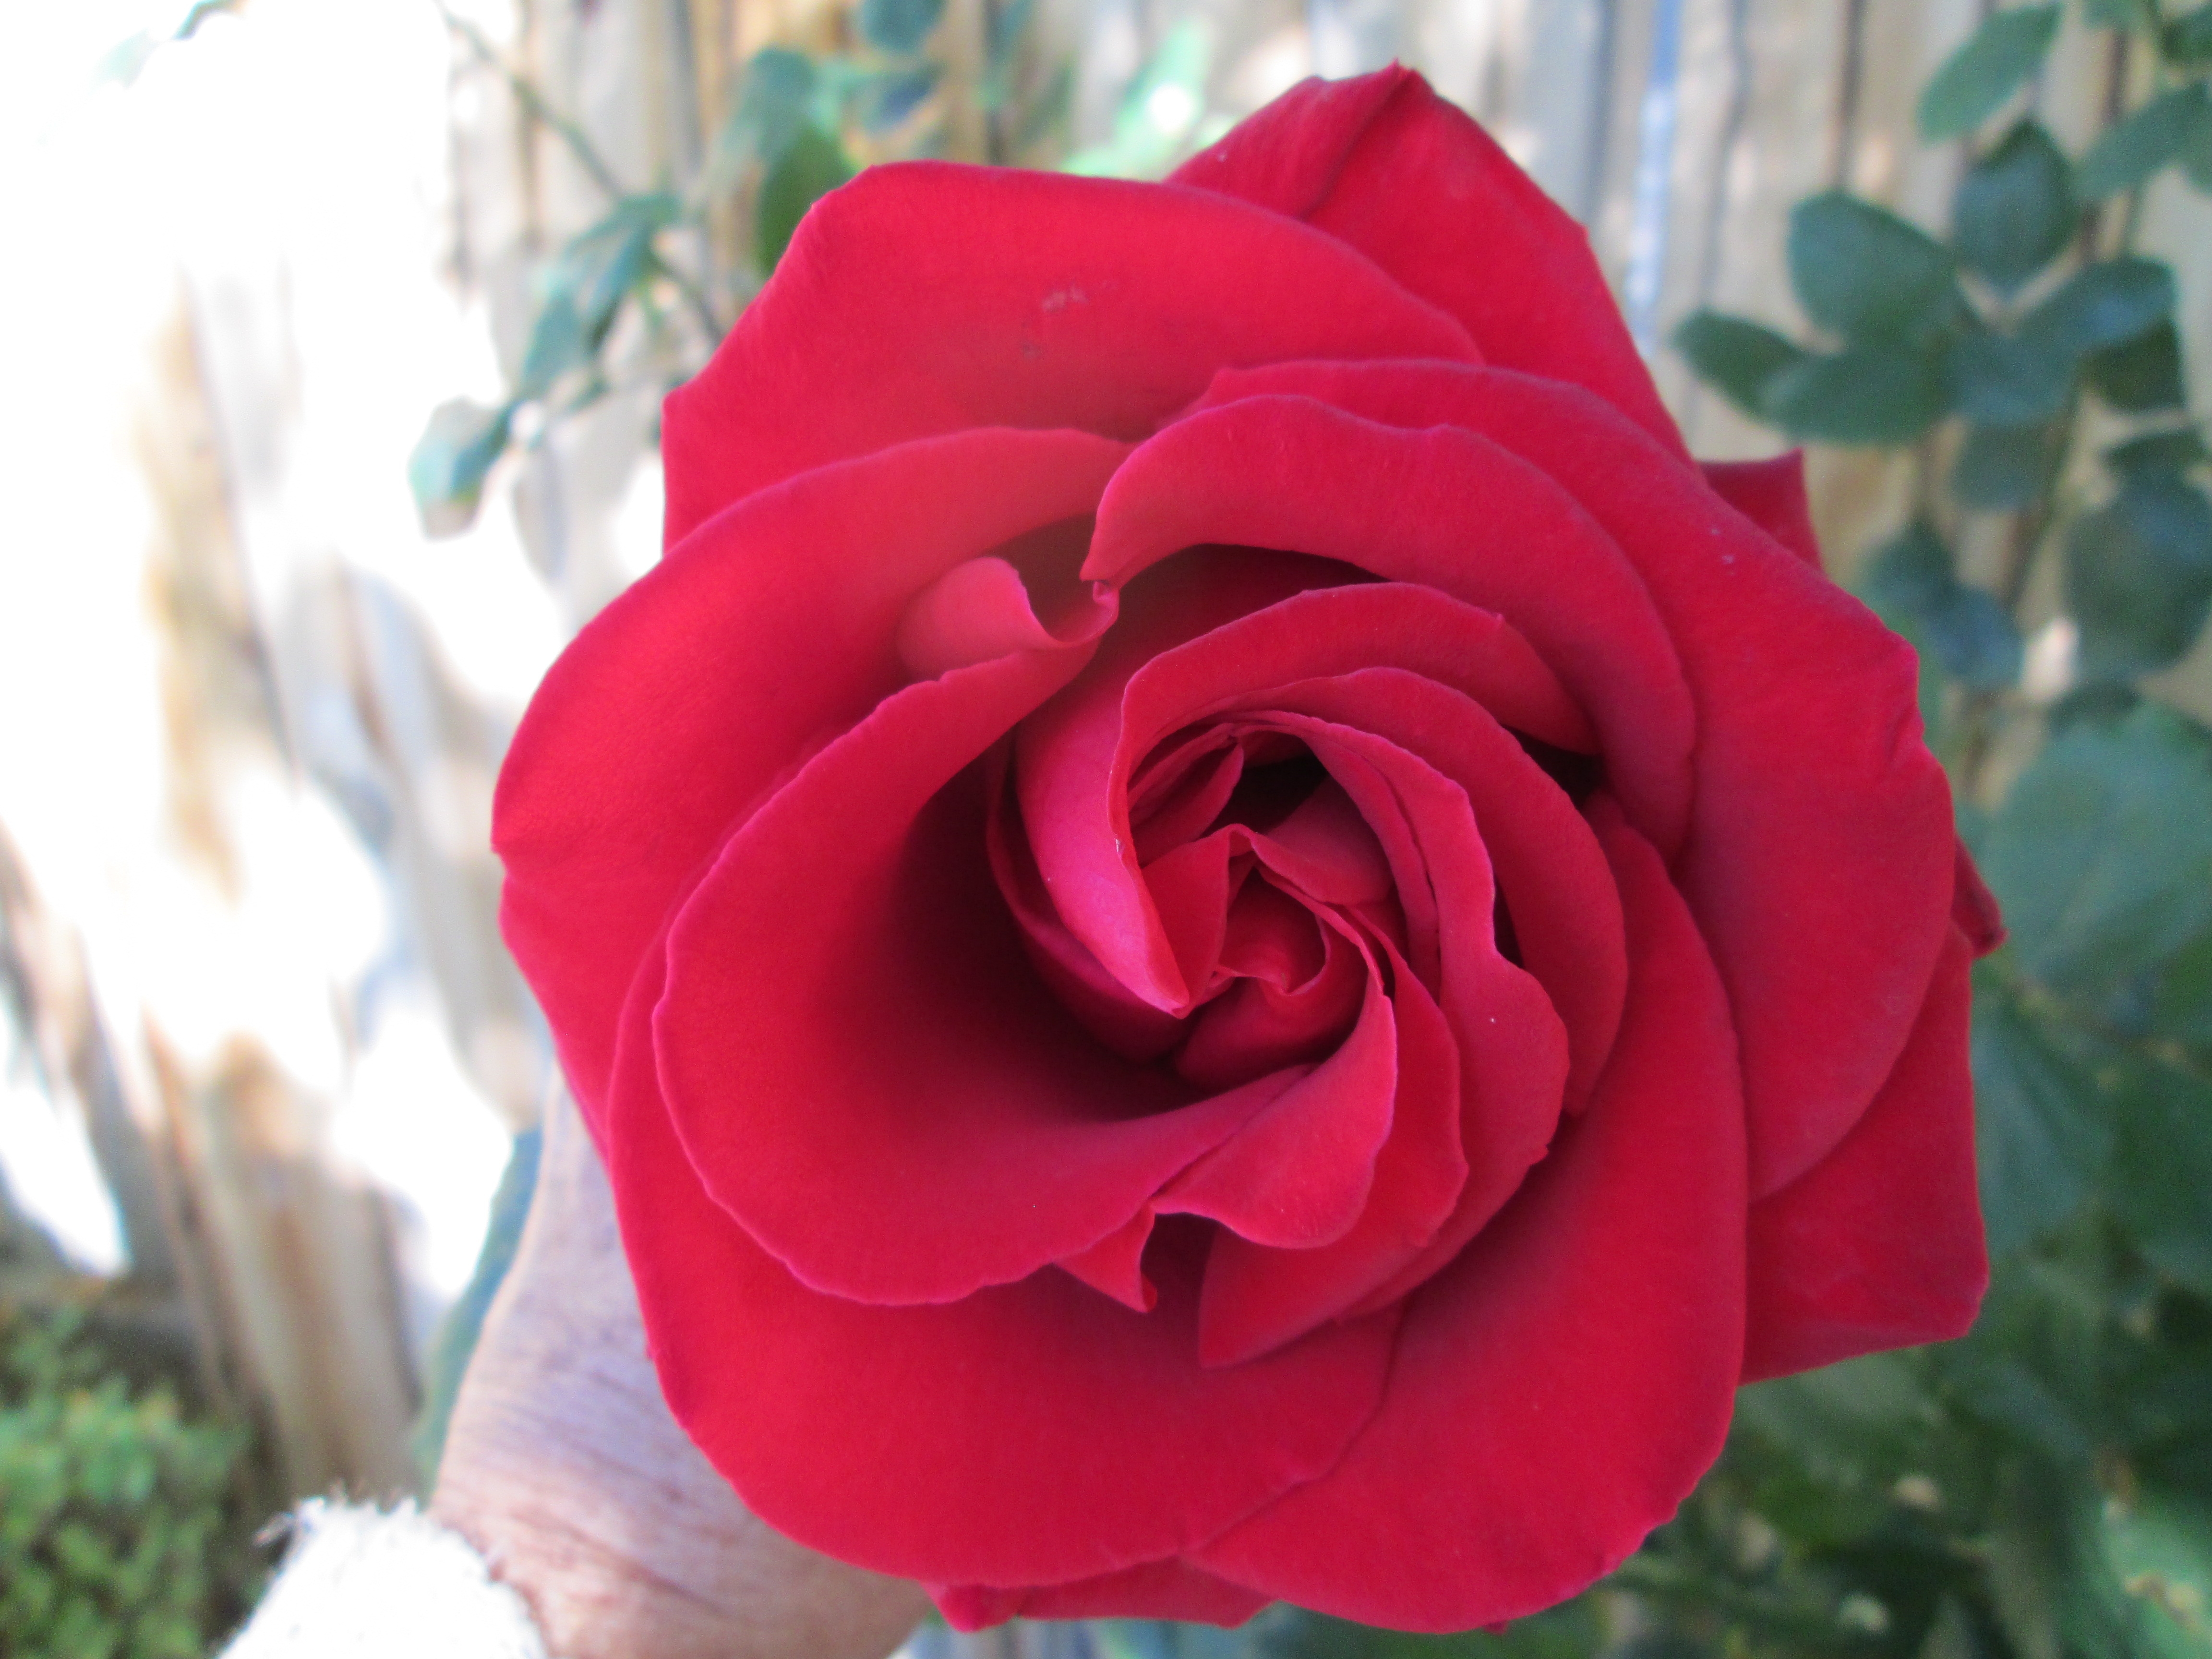 Growing Roses from Cuttings - The Backyard Gardener - ANR Blogs